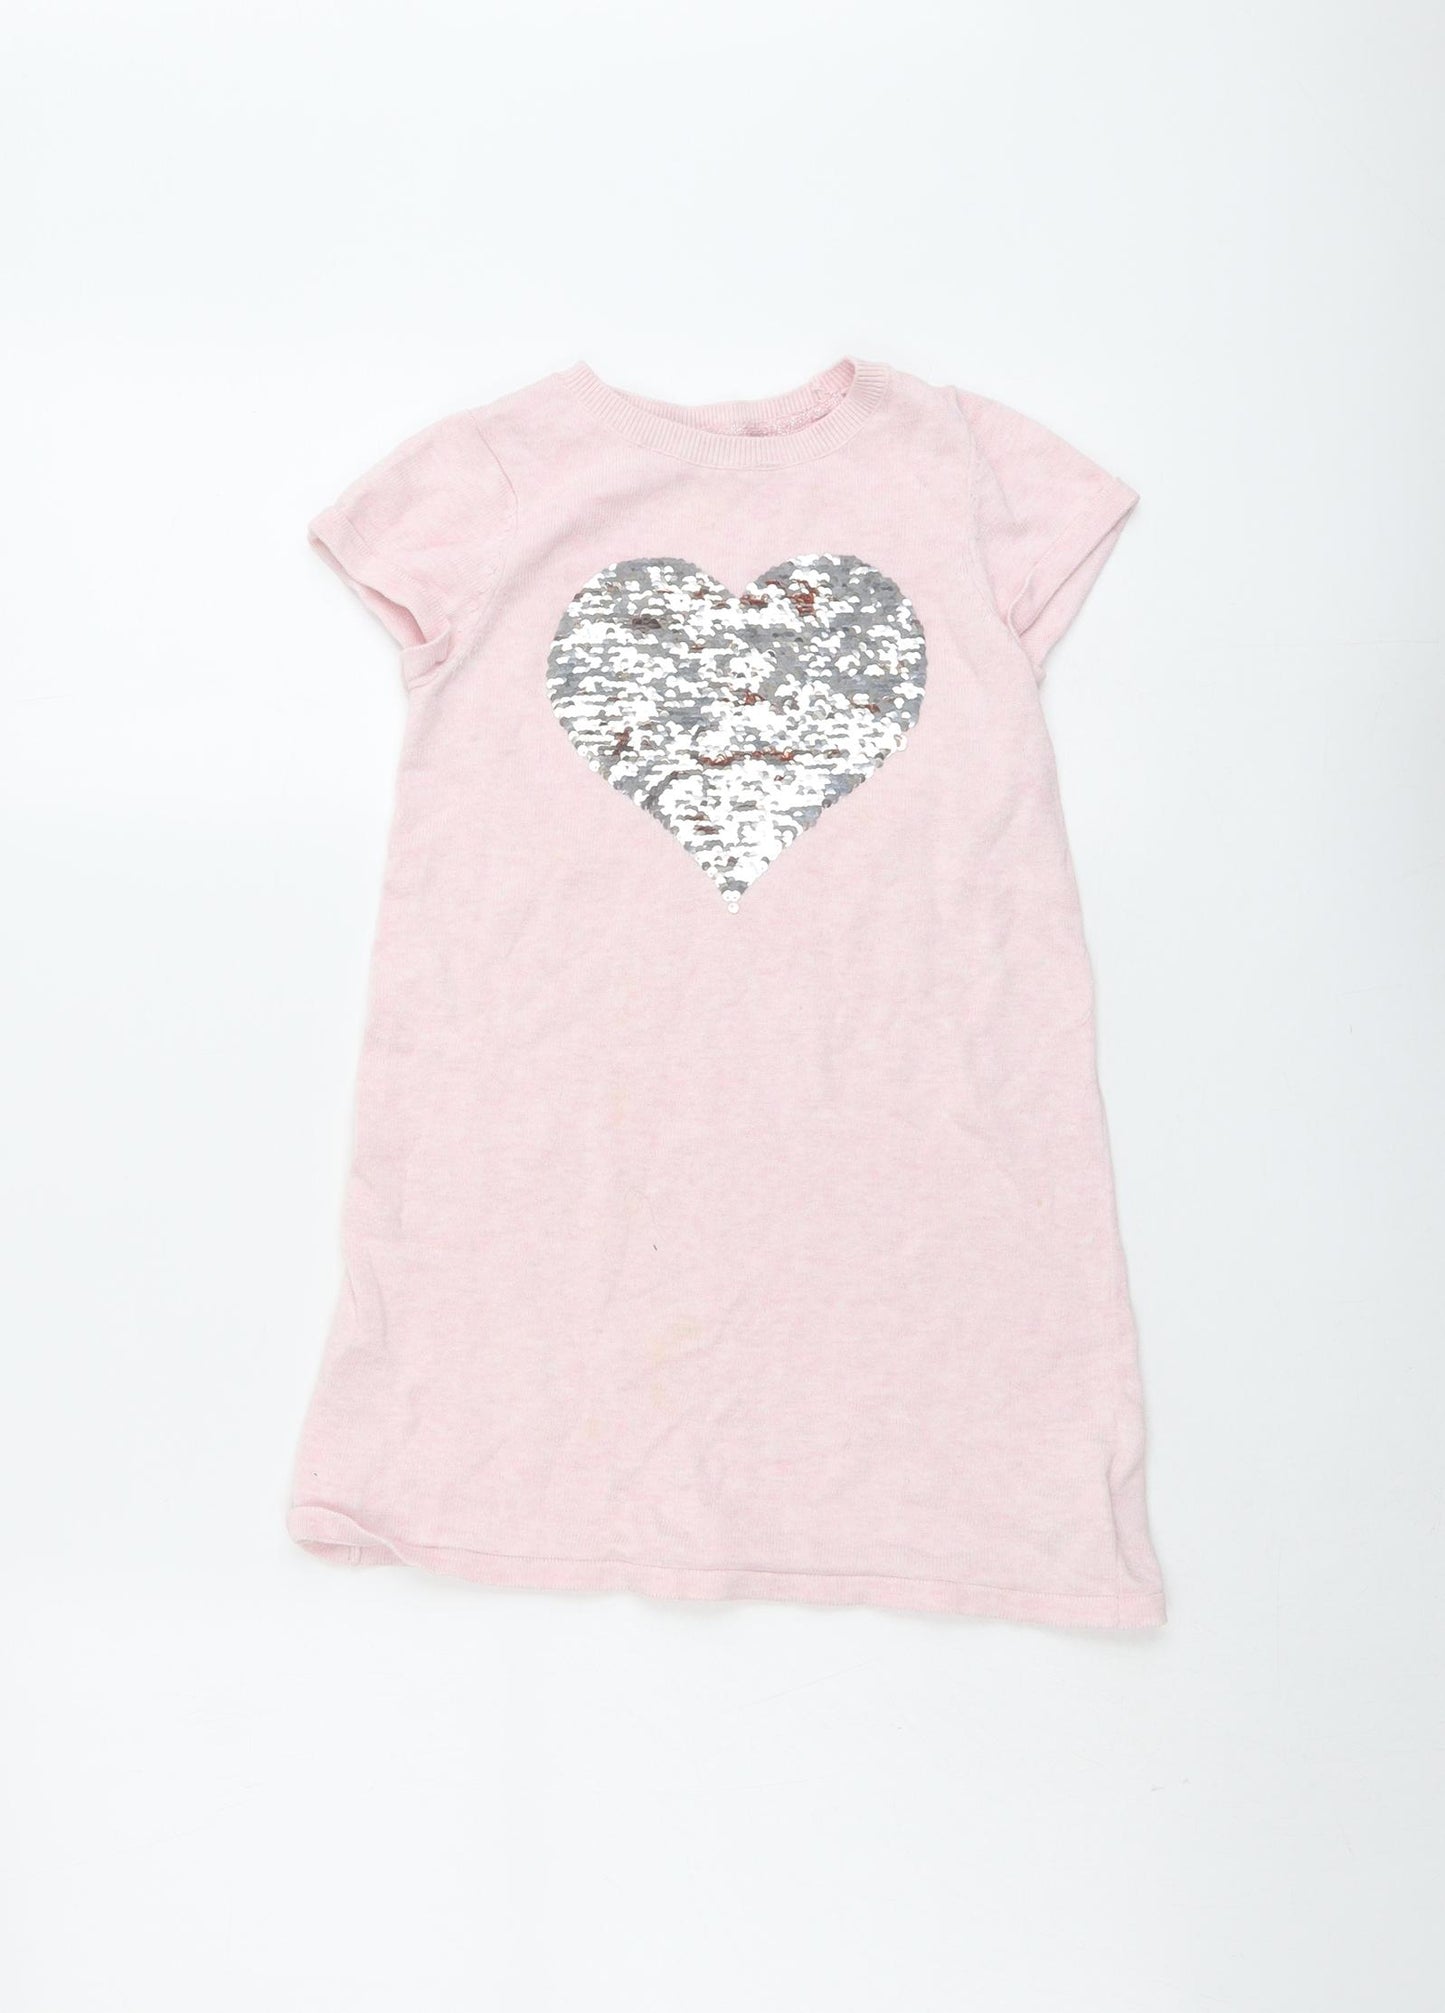 H&M Girls Pink Cotton T-Shirt Dress Size 5-6 Years Round Neck Pullover - Sequin Heart Print